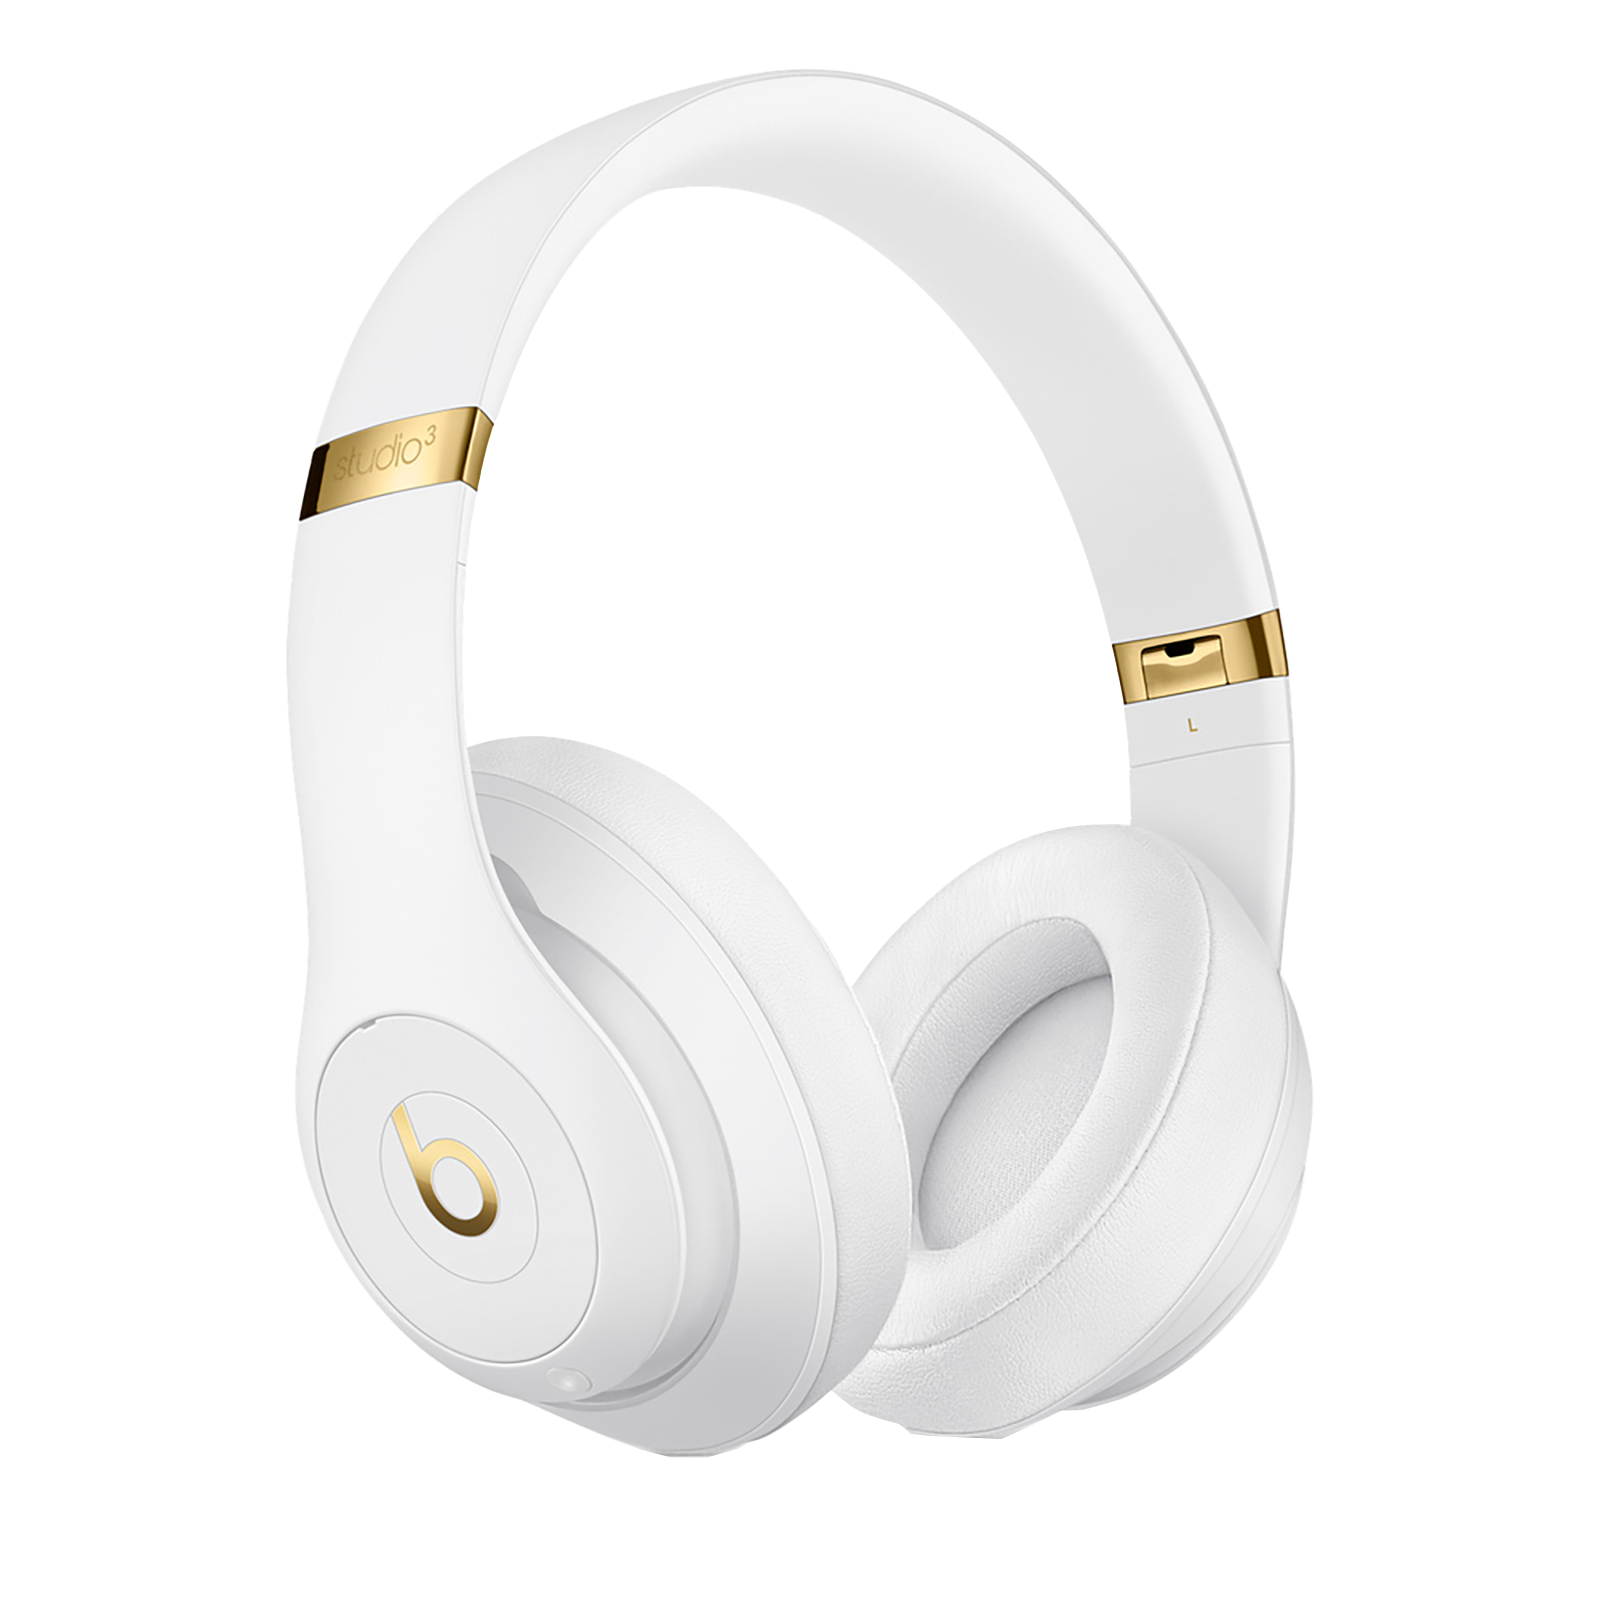 Beats Studio 3 MX3Y2ZM/A Over-Ear Wireless Headphone with Mic (Bluetooth, White)_1